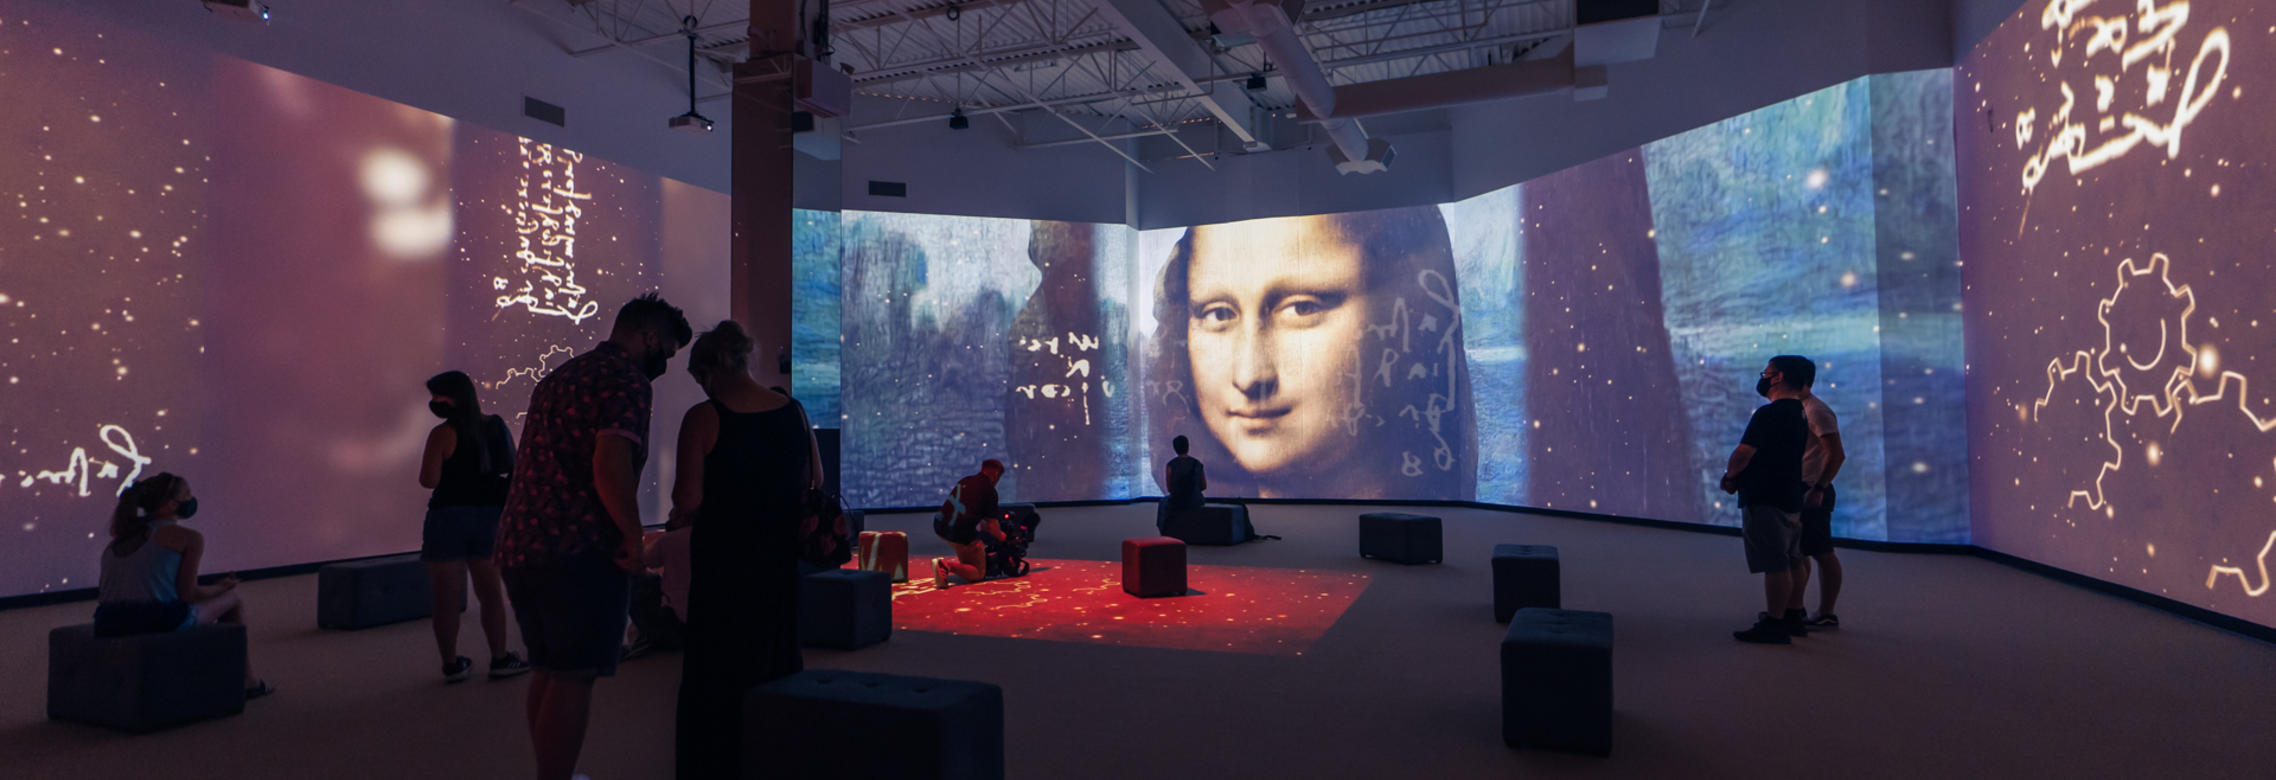 A group of on-lookers stand amidst immersive projections of Leonardo Da Vinci's works featuring Mona Lisa